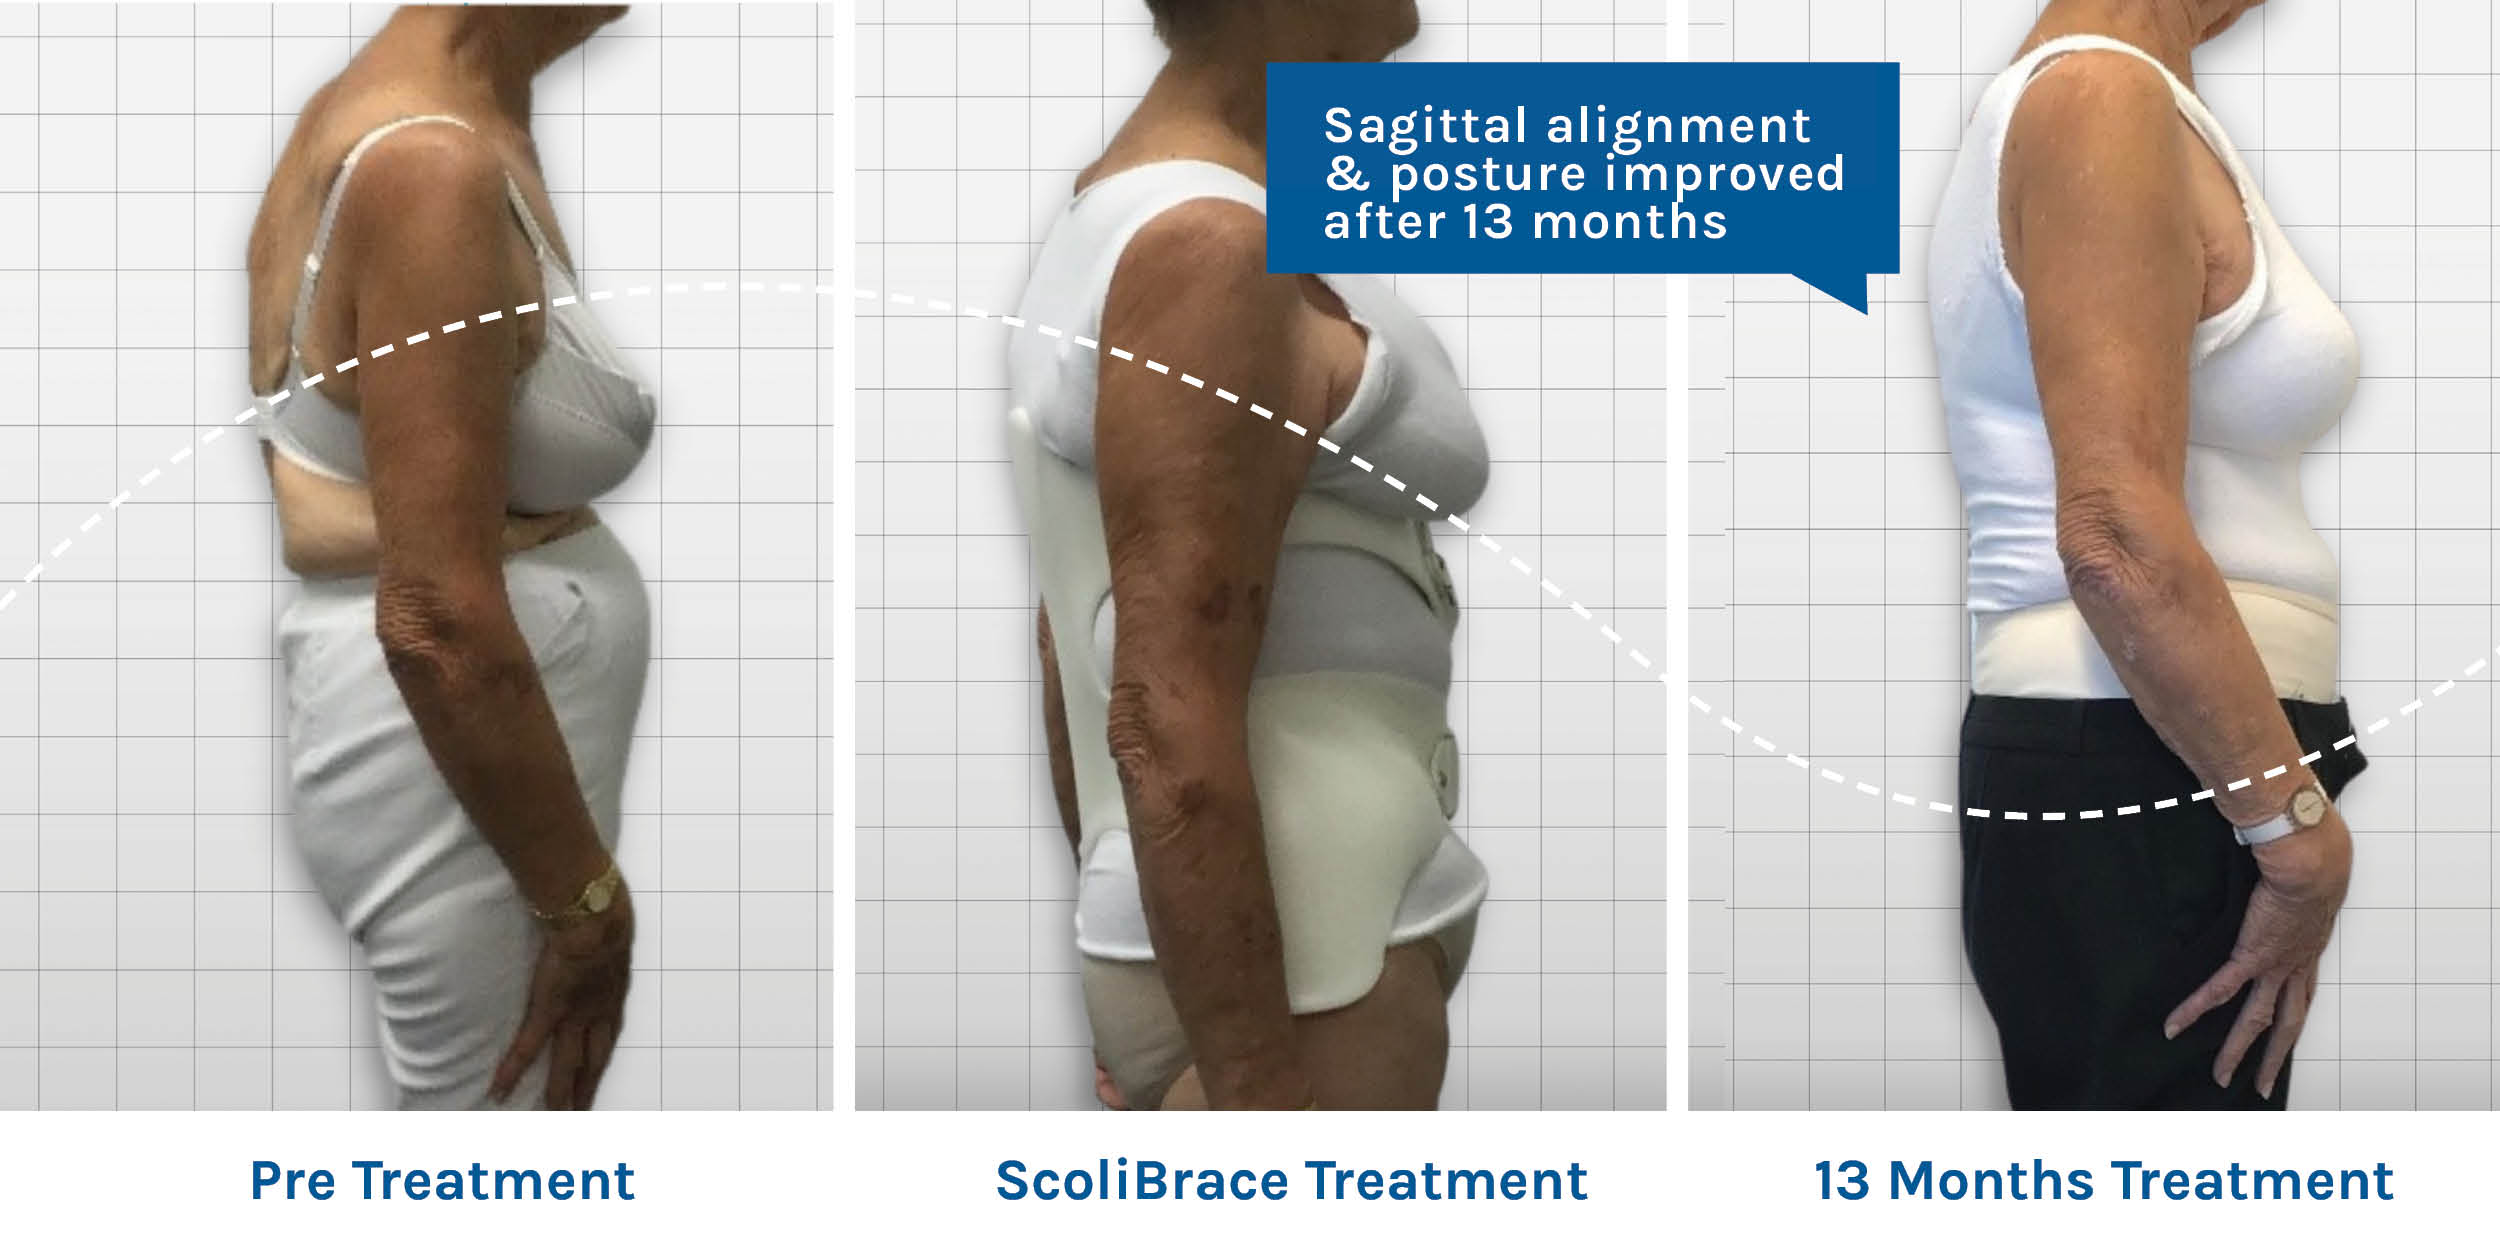 ScoliBrace is patient friendly and gets results